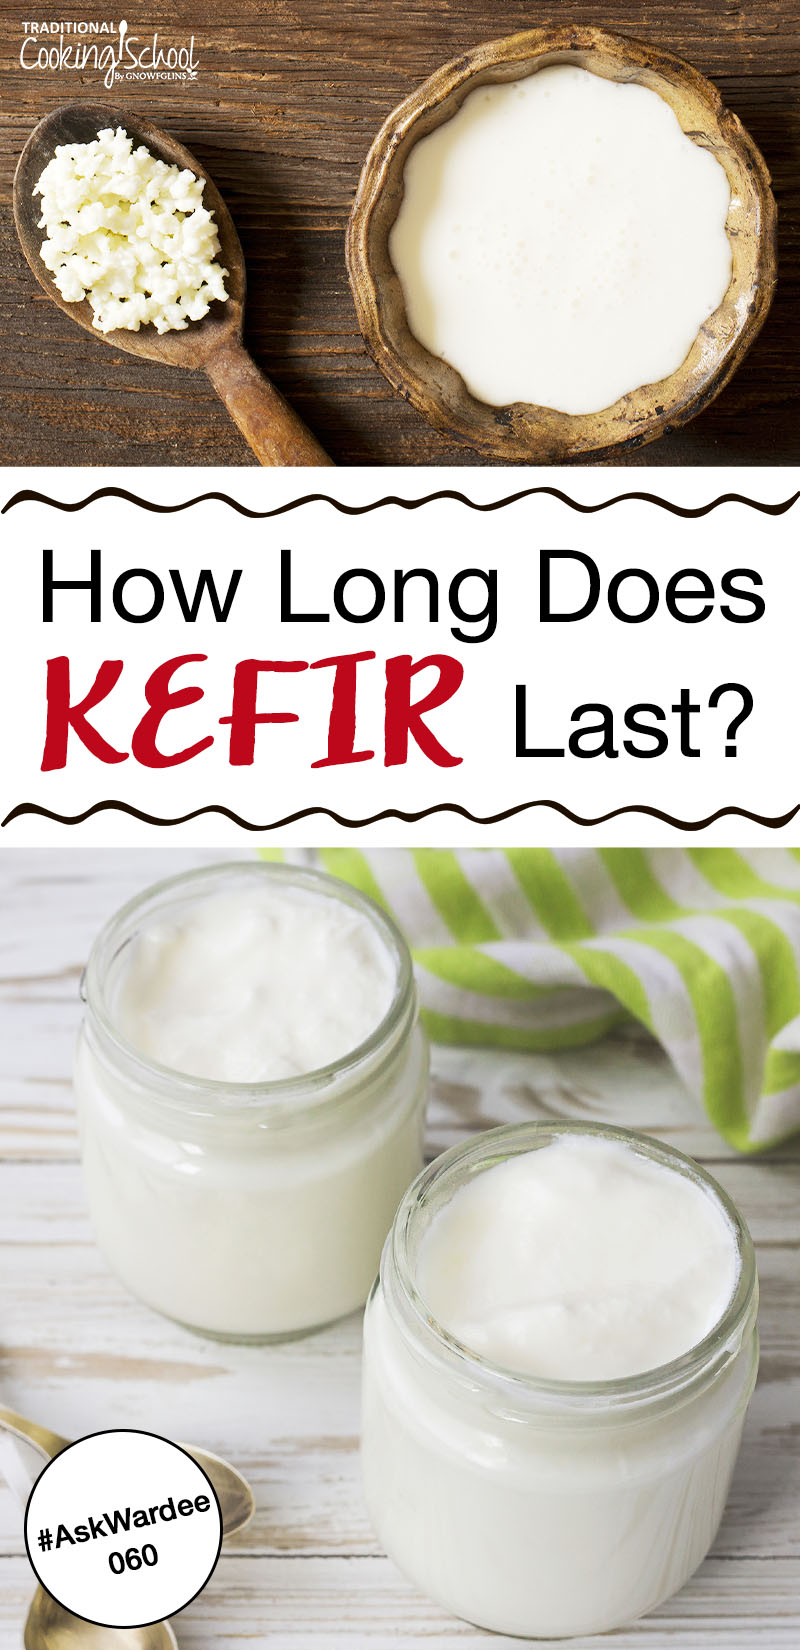 Glass of milk kefir on a table with striped towel in the background and text overlay.